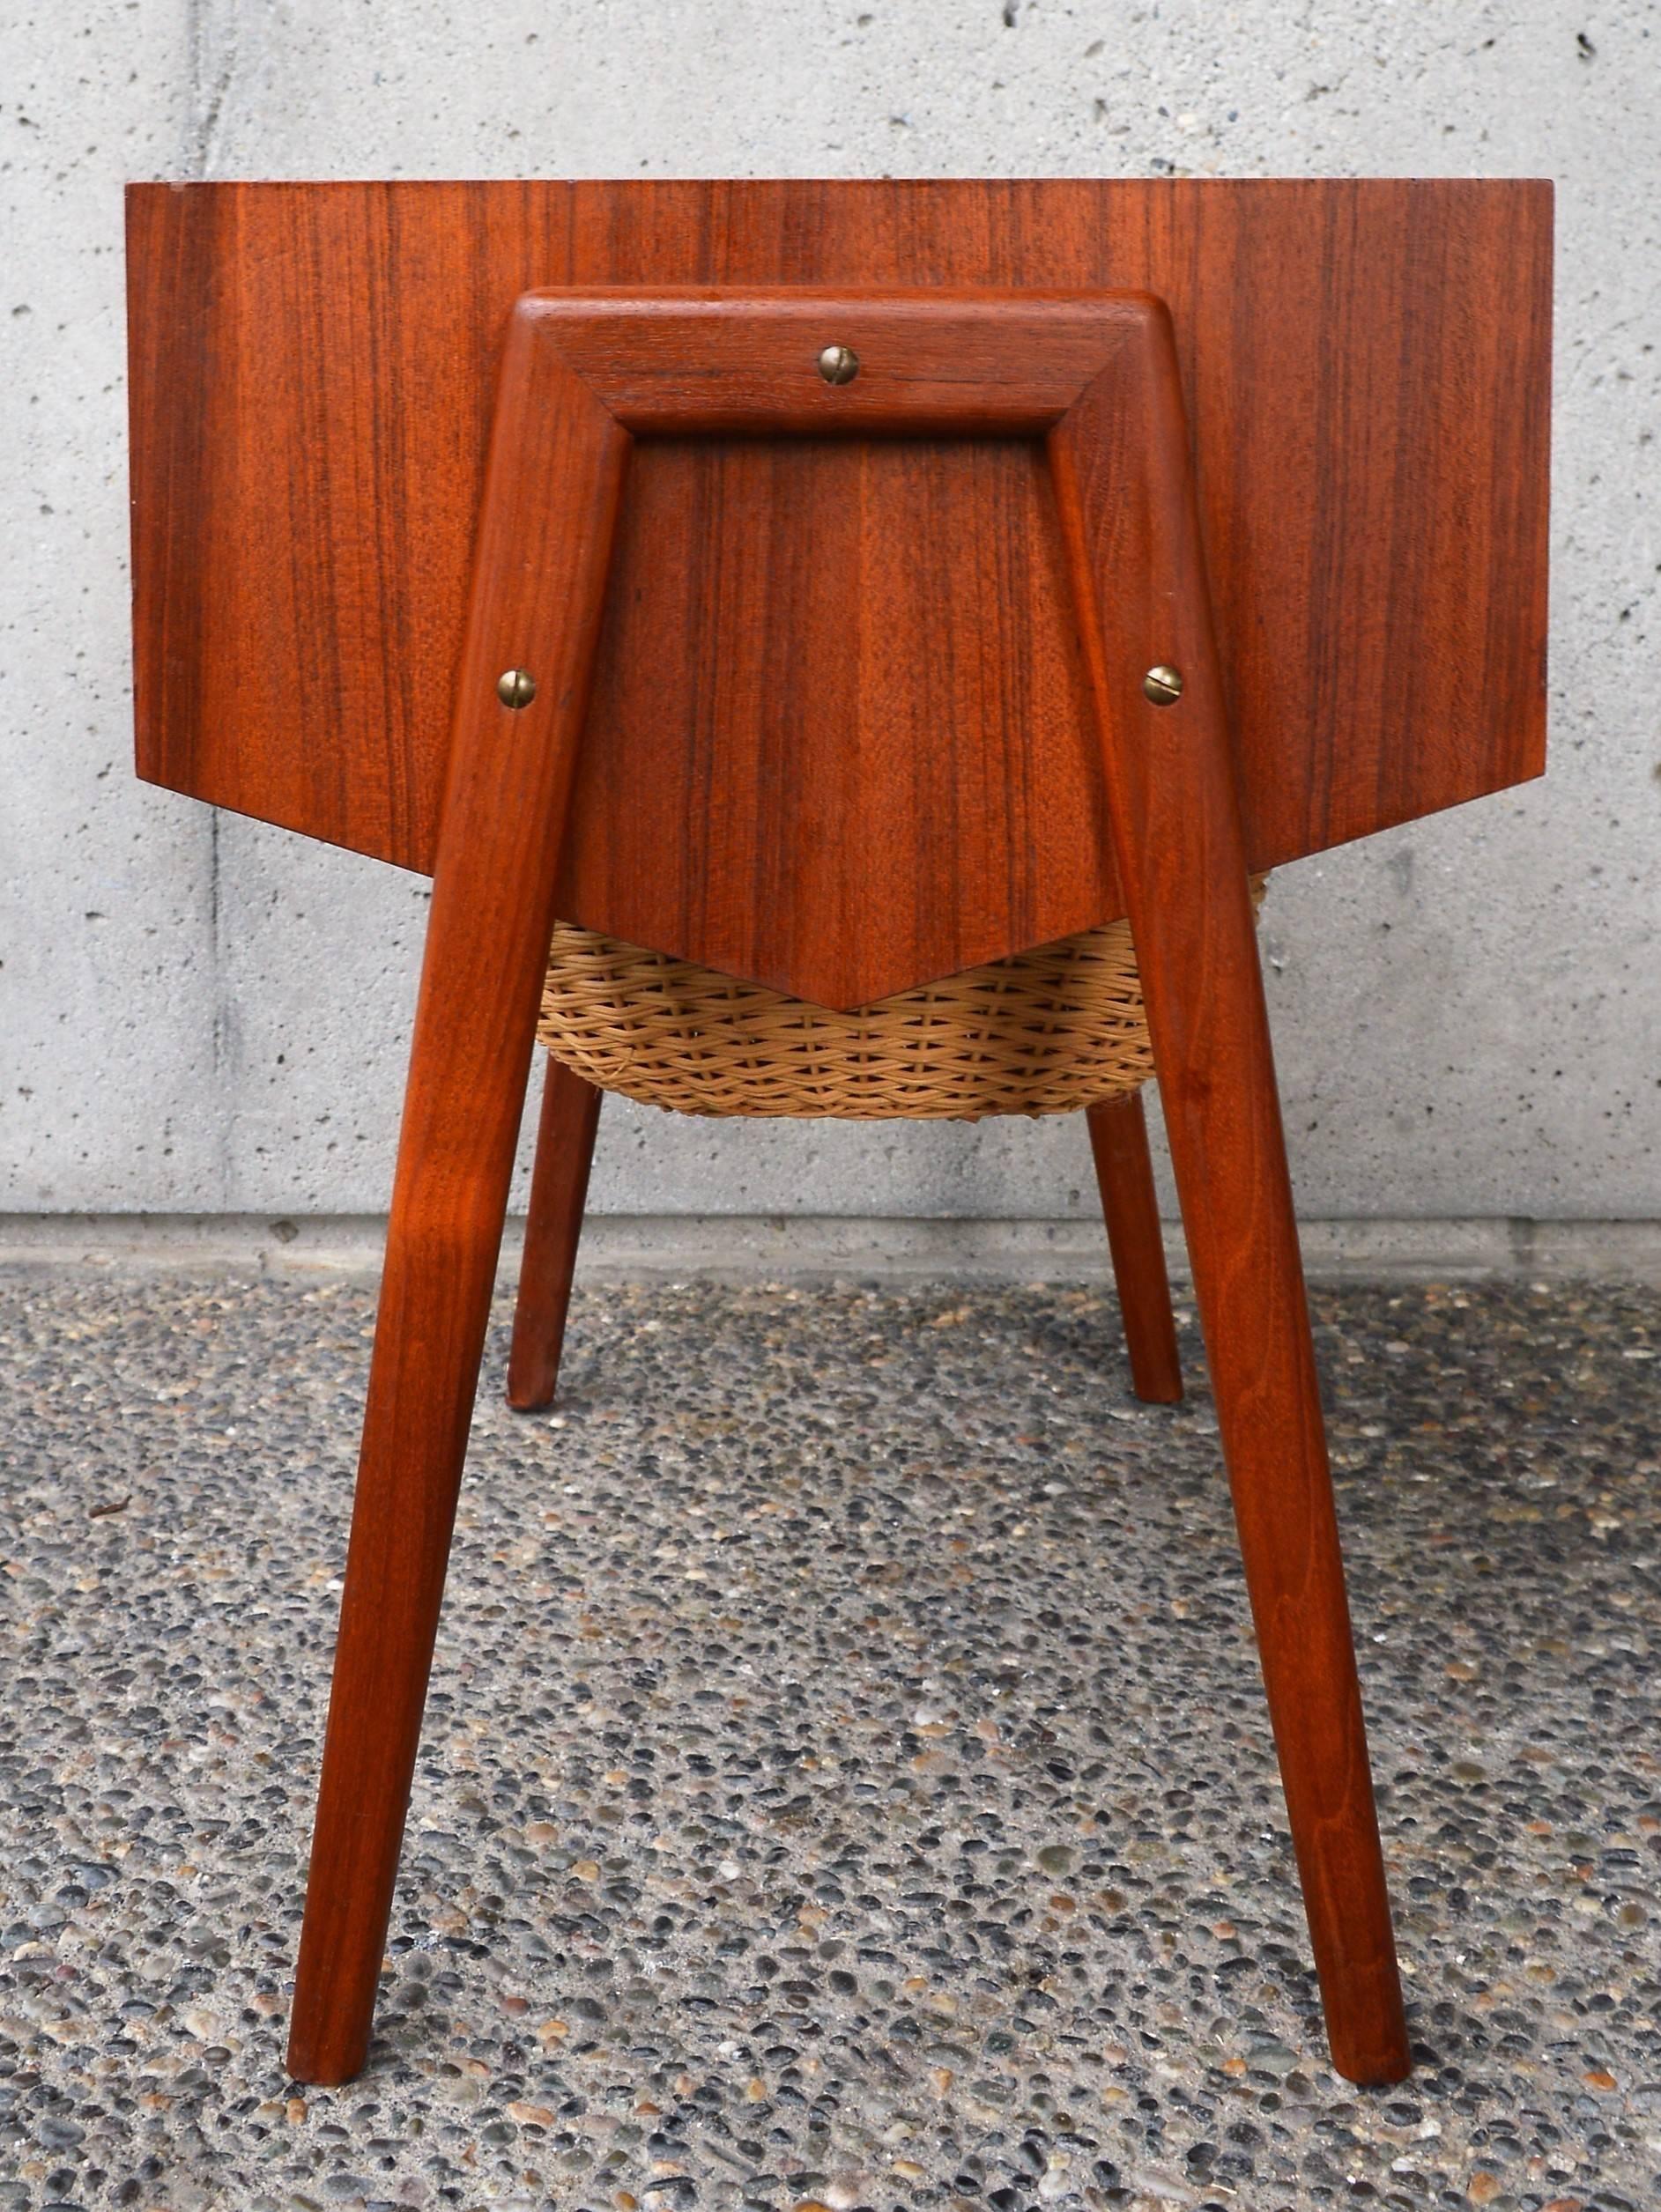 This fun Danish modern teak side table has awesome style and design. Featuring a drawer with segmentations that can be opened from either side, as well as a storage basket on a lower shelf. Cute n-shaped side braces with splayed legs, and a